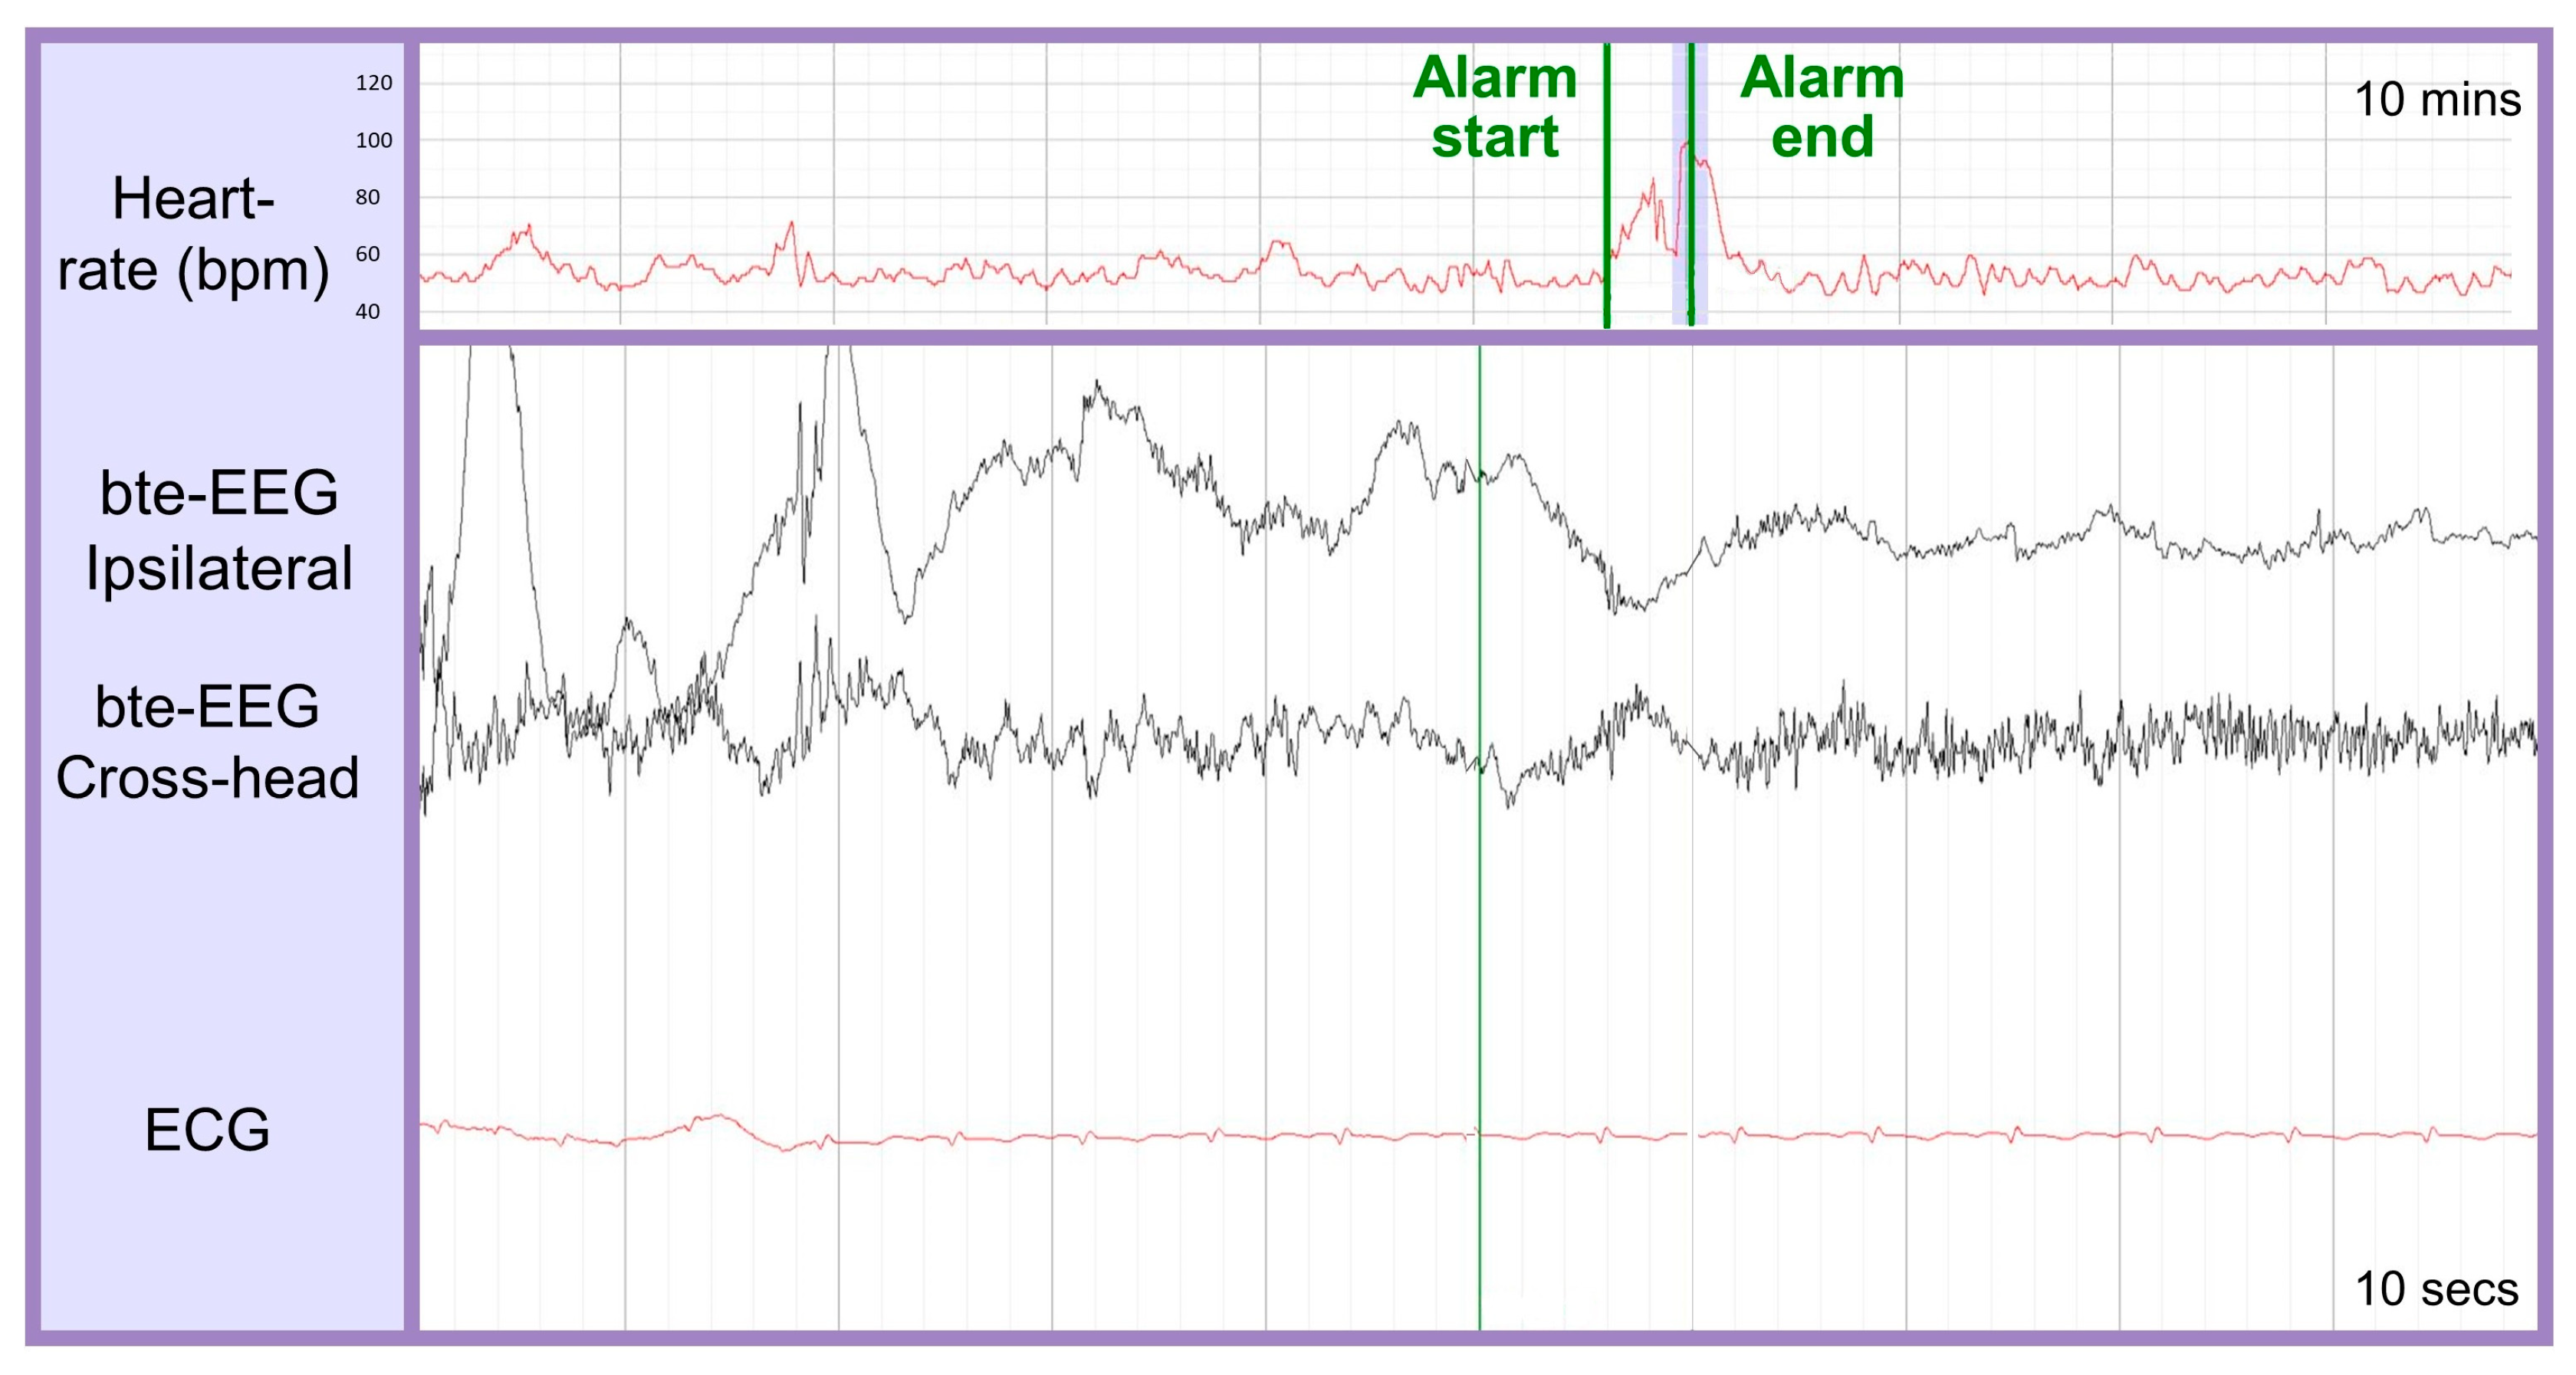 Abrazo Health using AI-powered EEG system for seizure detection